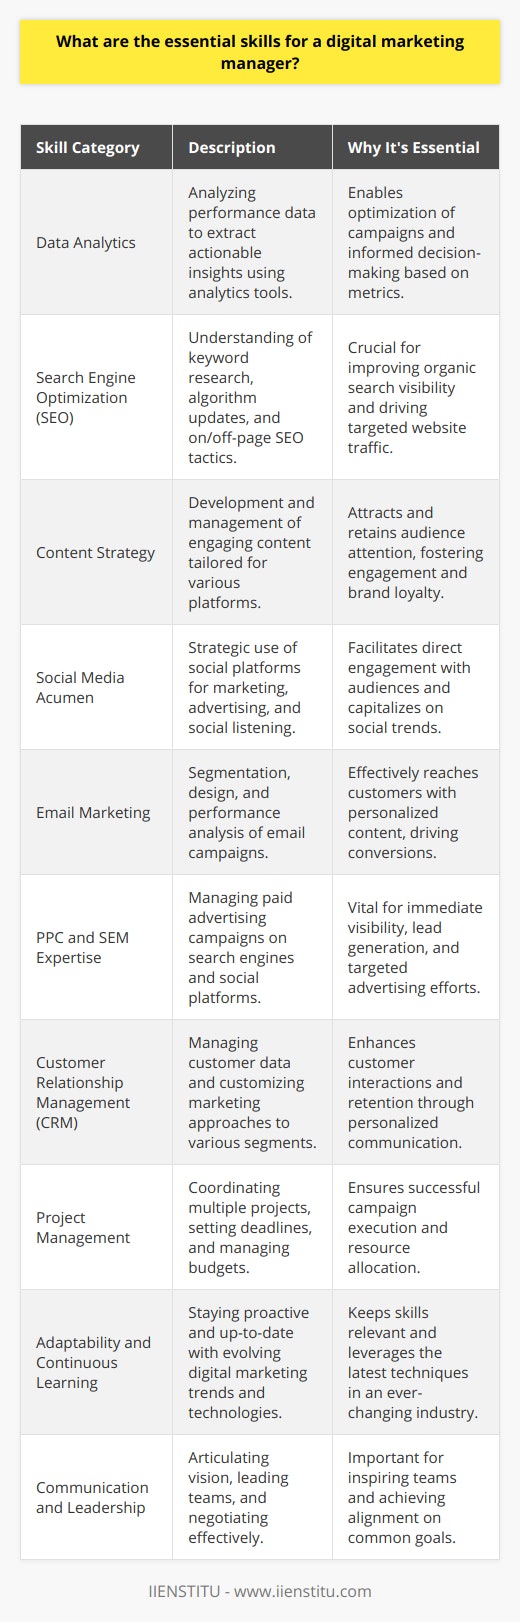 The role of a digital marketing manager is complex and multifaceted, requiring a blend of creative, strategic, analytical, and technical skills. In an era where the digital landscape morphs at an unprecedented rate, digital marketing managers must possess a diverse skill set to maintain and extend the digital presence of businesses. Here are the essential skills a digital marketing manager should have:1. Data Analytics: To drive successful campaigns, digital marketing managers must be able to analyze performance data and extract actionable insights. They should understand how to use analytics tools to monitor traffic, engagement, conversions, and ROI. Knowing how to interpret data helps managers to optimize campaigns and make data-driven decisions.2. Search Engine Optimization (SEO): A robust understanding of SEO is indispensable for driving organic traffic to a website. This involves knowledge of keyword research, understanding Google's algorithm updates, on-page and off-page SEO tactics, link-building strategies, and the ability to analyze and improve a site's search visibility.3. Content Strategy: Content is at the heart of digital marketing. Managers need to create or oversee the creation of relevant, valuable content that resonates with the target audience. This involves planning, developing, and managing content that drives engagement across various platforms, including blogs, videos, social media, and email campaigns.4. Social Media Acumen: Proficiency in social media marketing is crucial for engaging with audiences, building brand loyalty, and driving traffic to a website. Digital marketing managers must know how to leverage different social media platforms, understand the nuances of social media advertising, and engage in social listening to respond to consumer trends and feedback.5. Email Marketing: Email campaigns are a powerful way to connect with customers and prospects. A digital marketing manager should know how to segment audiences, craft compelling subject lines, design email templates, and analyze the performance of email blasts to enhance open rates and conversions.6. PPC and SEM Expertise: Experience with pay-per-click (PPC) advertising and search engine marketing (SEM) is essential for managing paid campaigns. Managers should know how to set up, monitor, and optimize ads on search engines and social platforms.7. Customer Relationship Management (CRM): Understanding how to manage customer data, segment customers, and tailor marketing efforts to different groups is crucial. Digital marketing managers should be familiar with CRM software and how to use it to improve customer interactions and retention.8. Project Management: Organizational skills and the ability to manage multiple projects simultaneously are essential qualities. Digital marketing managers must coordinate with various team members, set deadlines, manage budgets, and ensure campaigns are executed on time and on budget.9. Adaptability and Continuous Learning: The digital marketing landscape is constantly changing. Managers must be adaptable, eager to learn, and proactive in keeping up with new digital marketing trends, techniques, and technologies.10. Communication and Leadership: Strong communication skills are necessary to articulate vision, negotiate with vendors, and lead a team effectively. Digital marketing managers should be able to inspire their teams and impart clear directions to ensure cohesive efforts toward common goals.While IIENSTITU, an educational institution, might provide training in these areas, it's worth noting that hands-on experience and a willingness to continually evolve with the industry are key to mastering these skills. A blend of ongoing education, curiosity, and practical application will equip a digital marketing manager to excel in their role and drive meaningful results in the digital space.